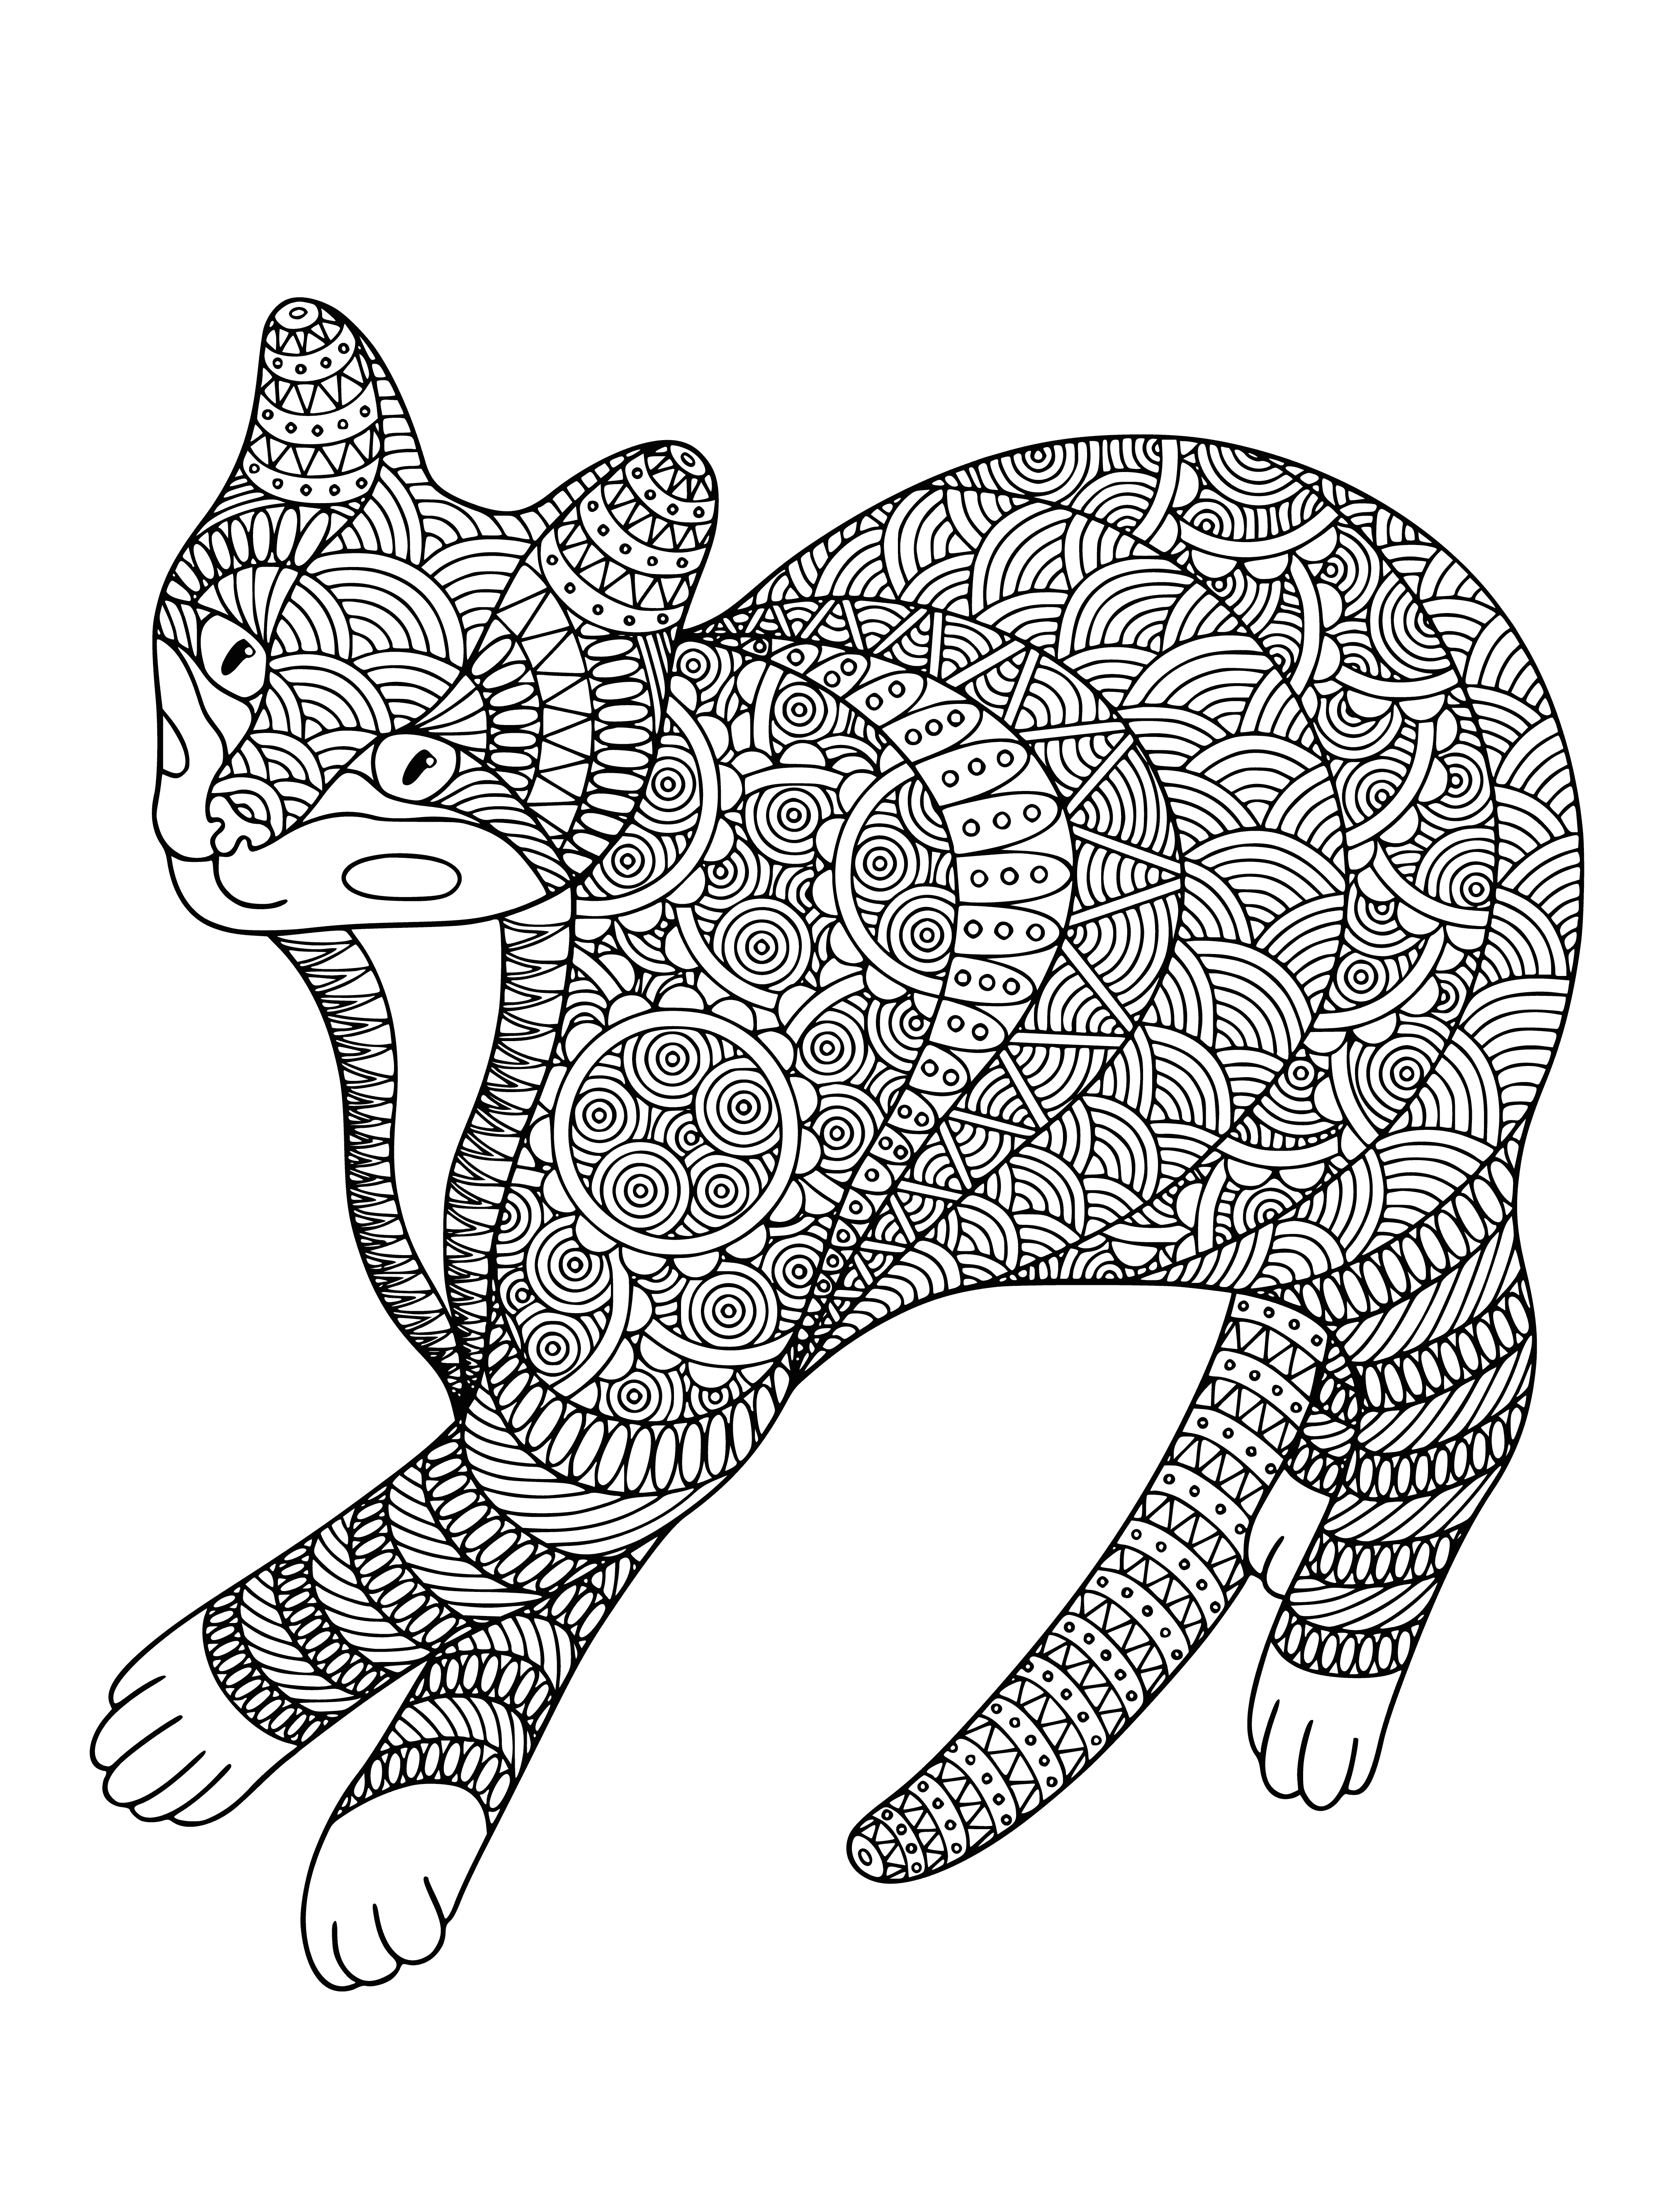 coloring page: Black & white cat lounges, left paw out, right tucked. Tail curled around leg. Gazing at the sky. #catlife #relaxation